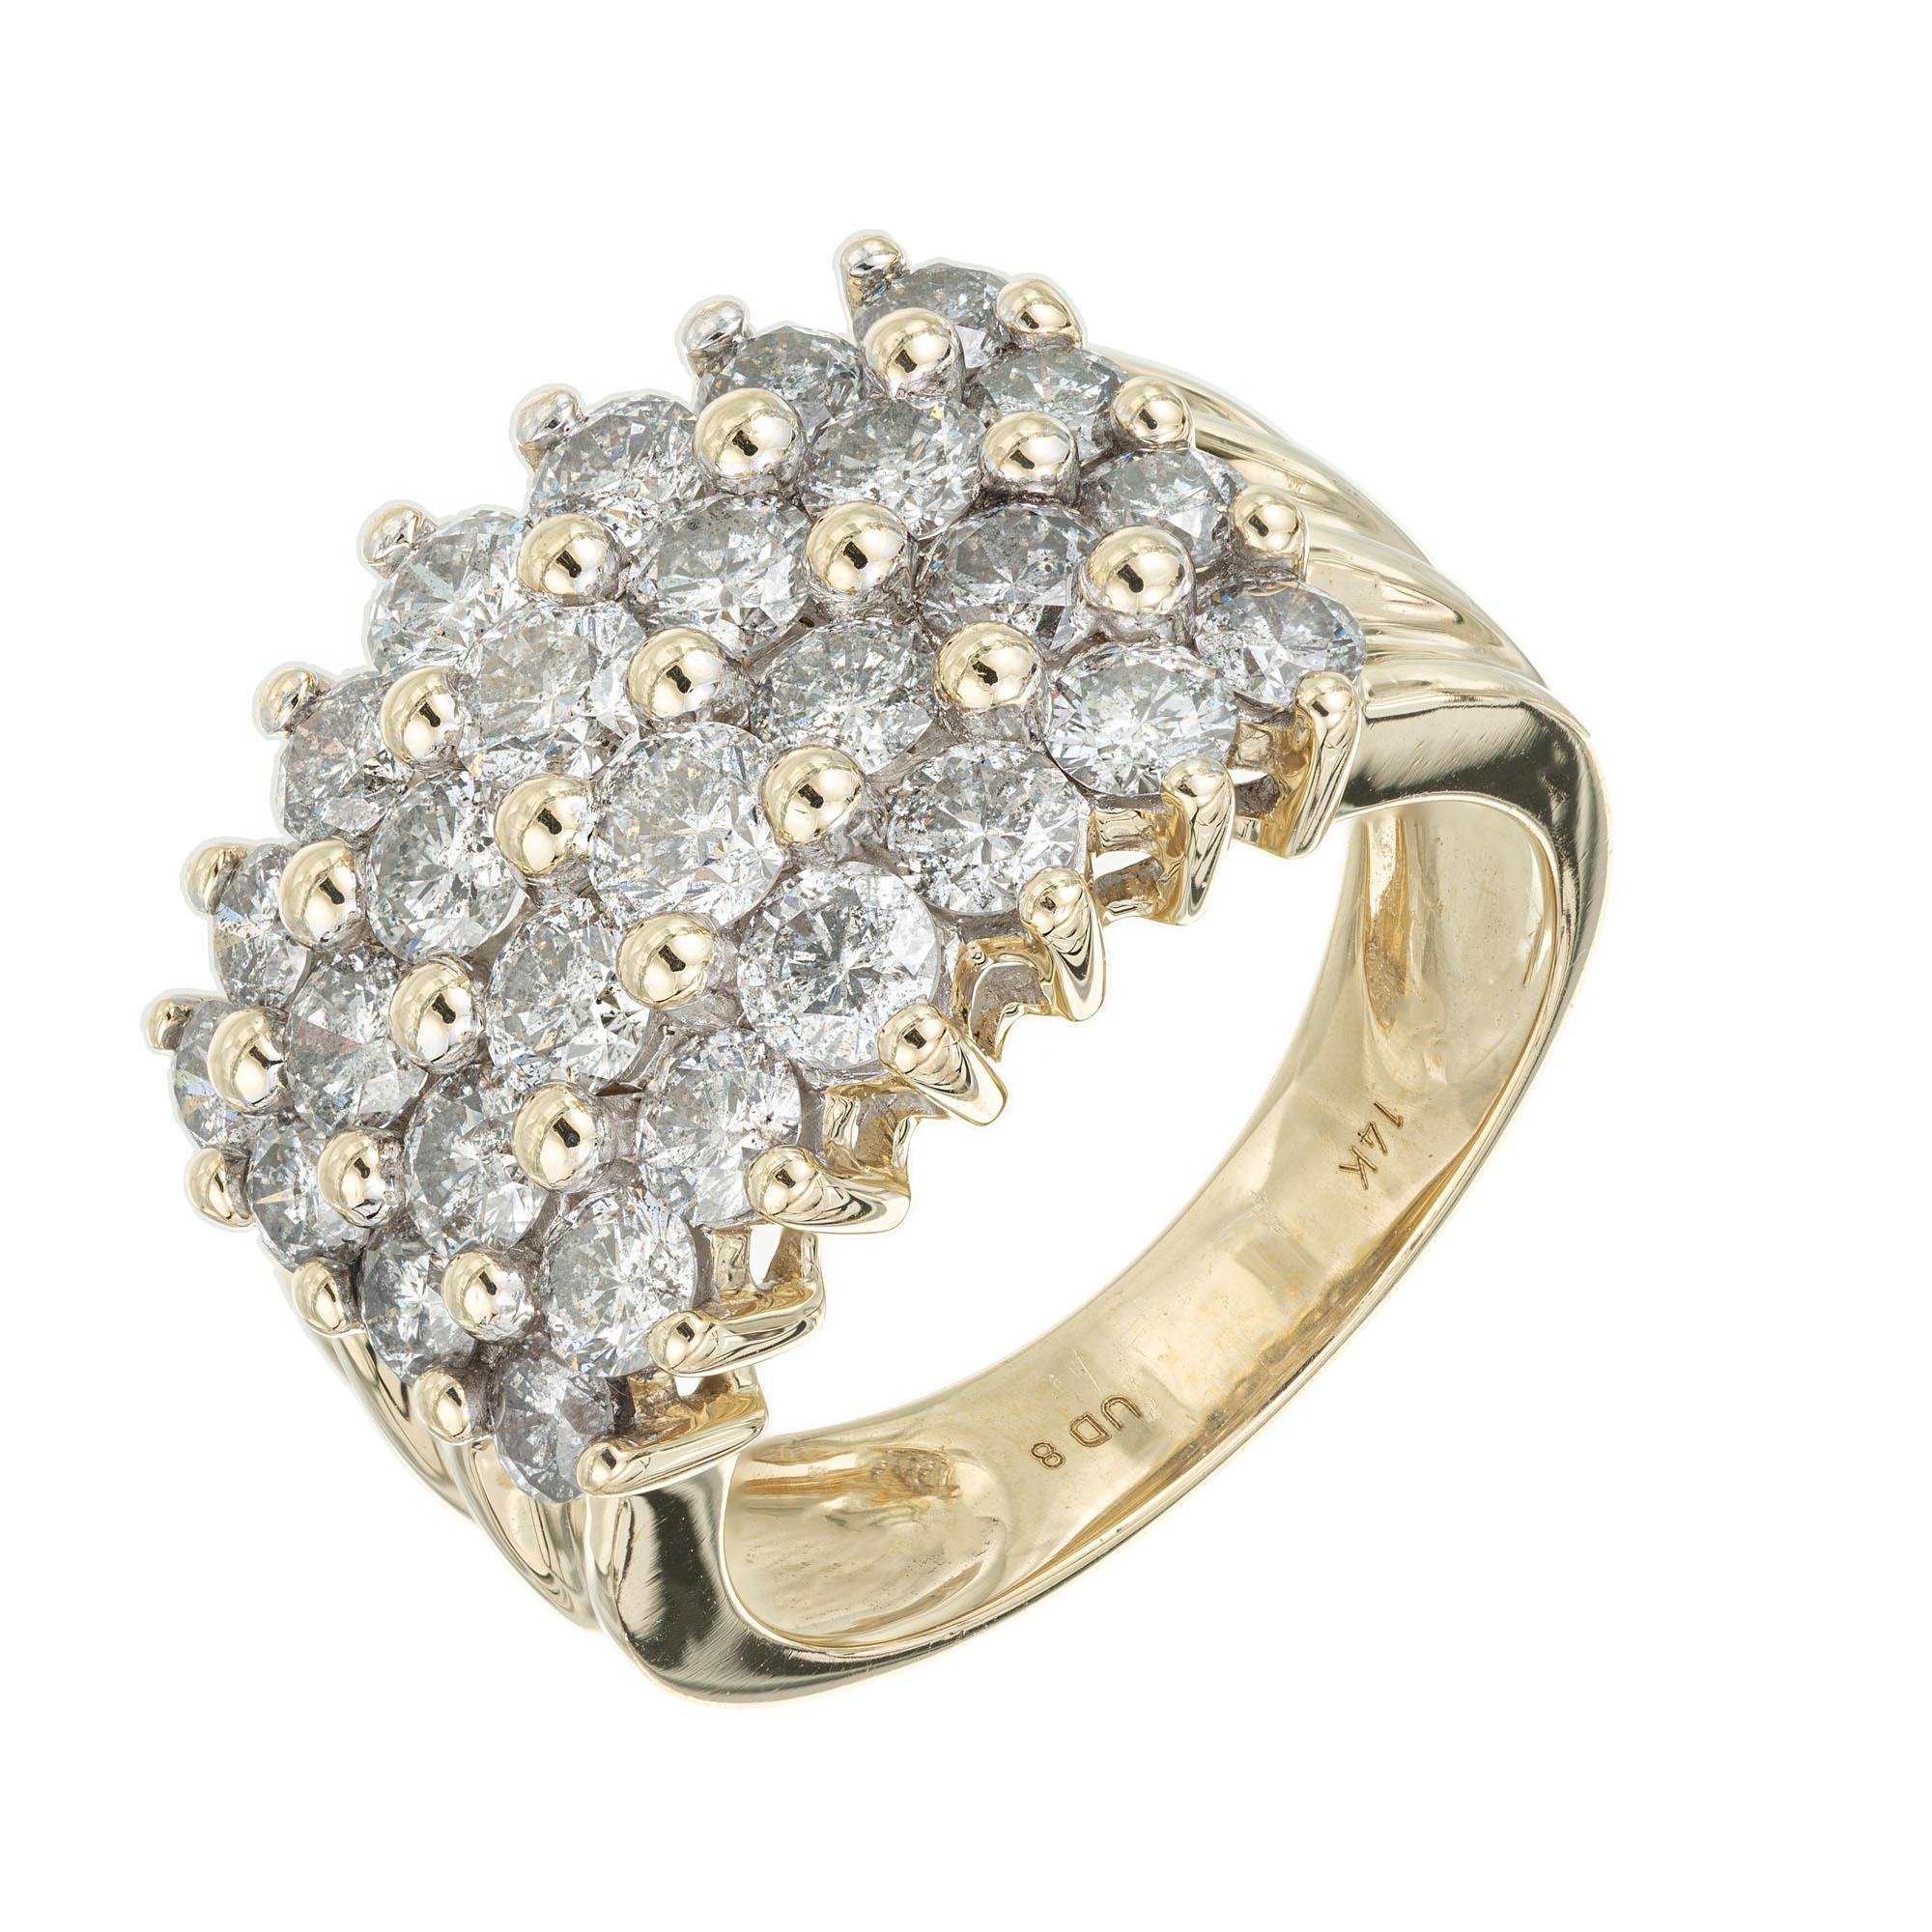 1980's Four row diamond band ring.  2.50cts of round diamonds set in a 14k yellow gold cluster setting. 

28 round diamonds, approx. total weight 2.50cts, H, SI1 – SI2
Size 7 and sizable
14k Yellow Gold
Tested and stamped: 14k
Hallmark: UD8
9.0